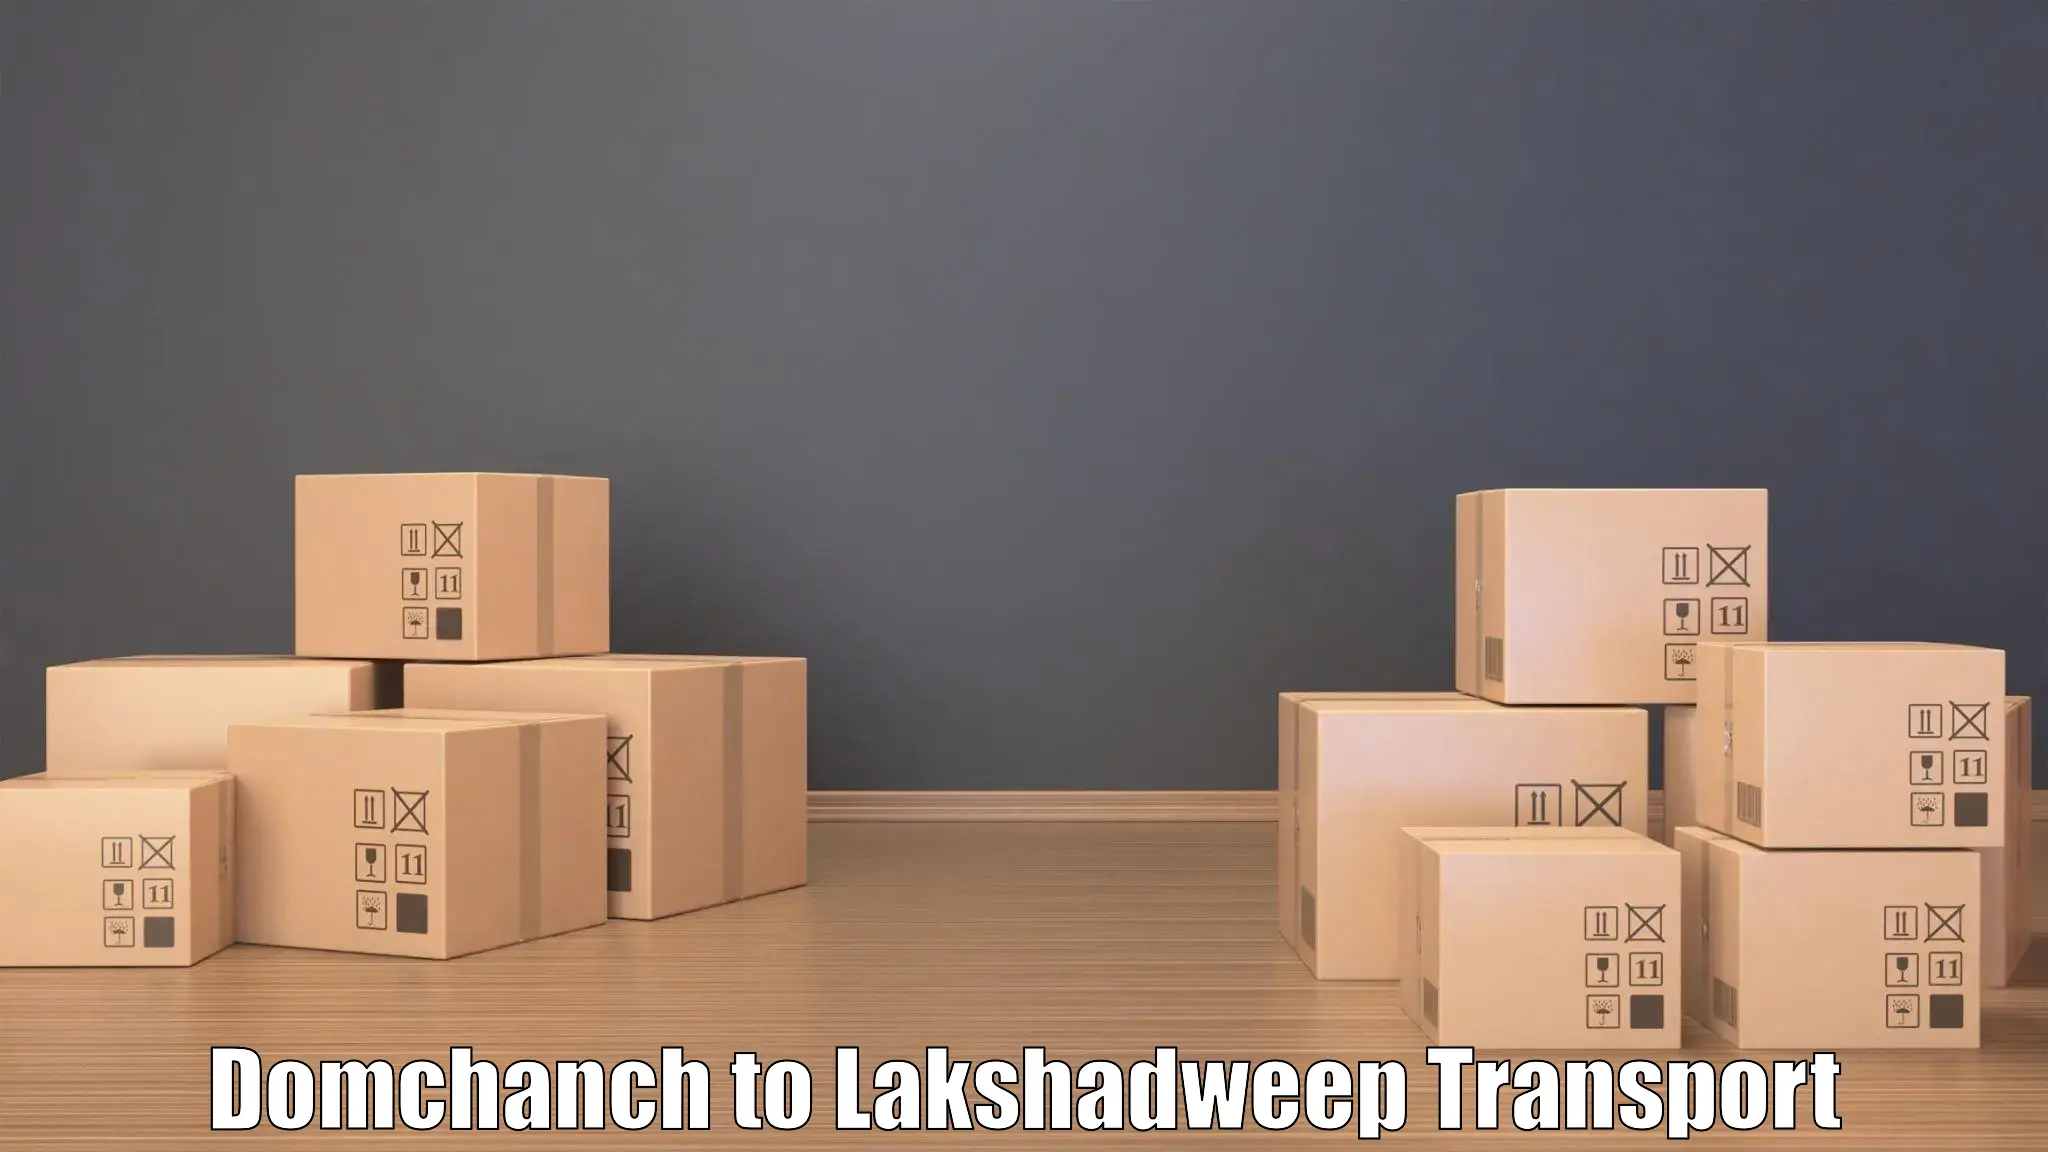 Road transport online services Domchanch to Lakshadweep